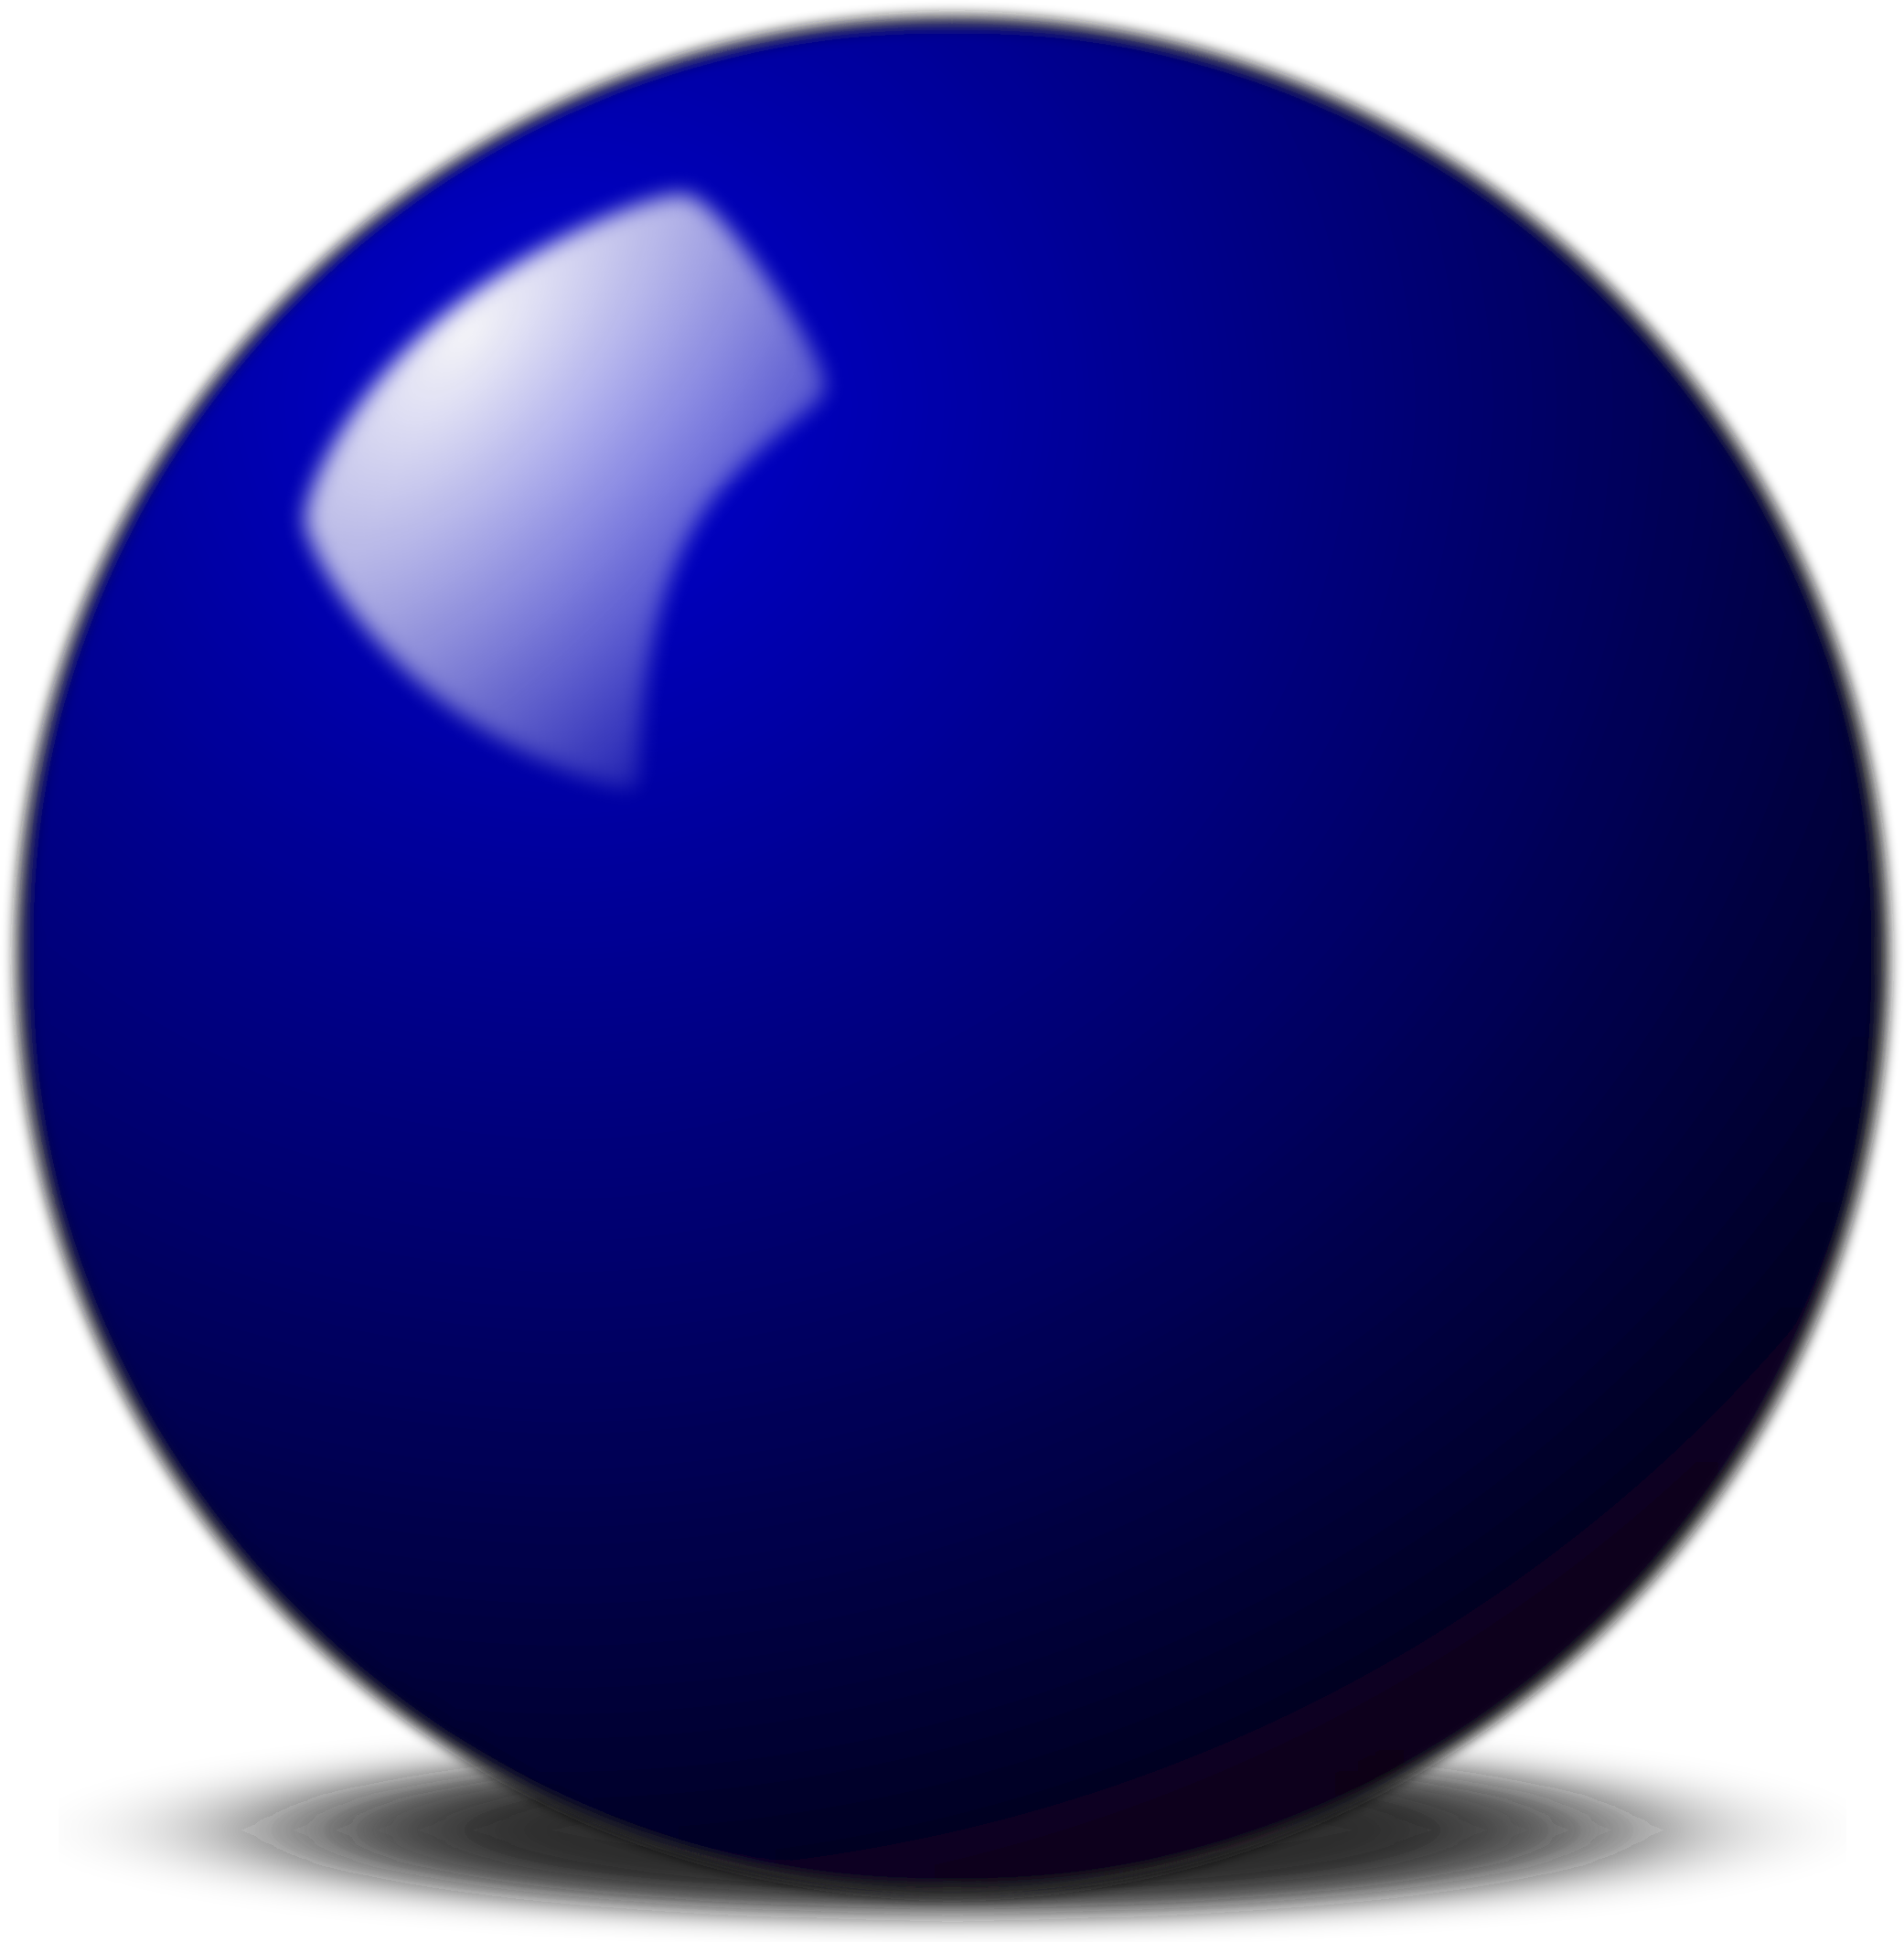 a blue circle with a white circle in the middle